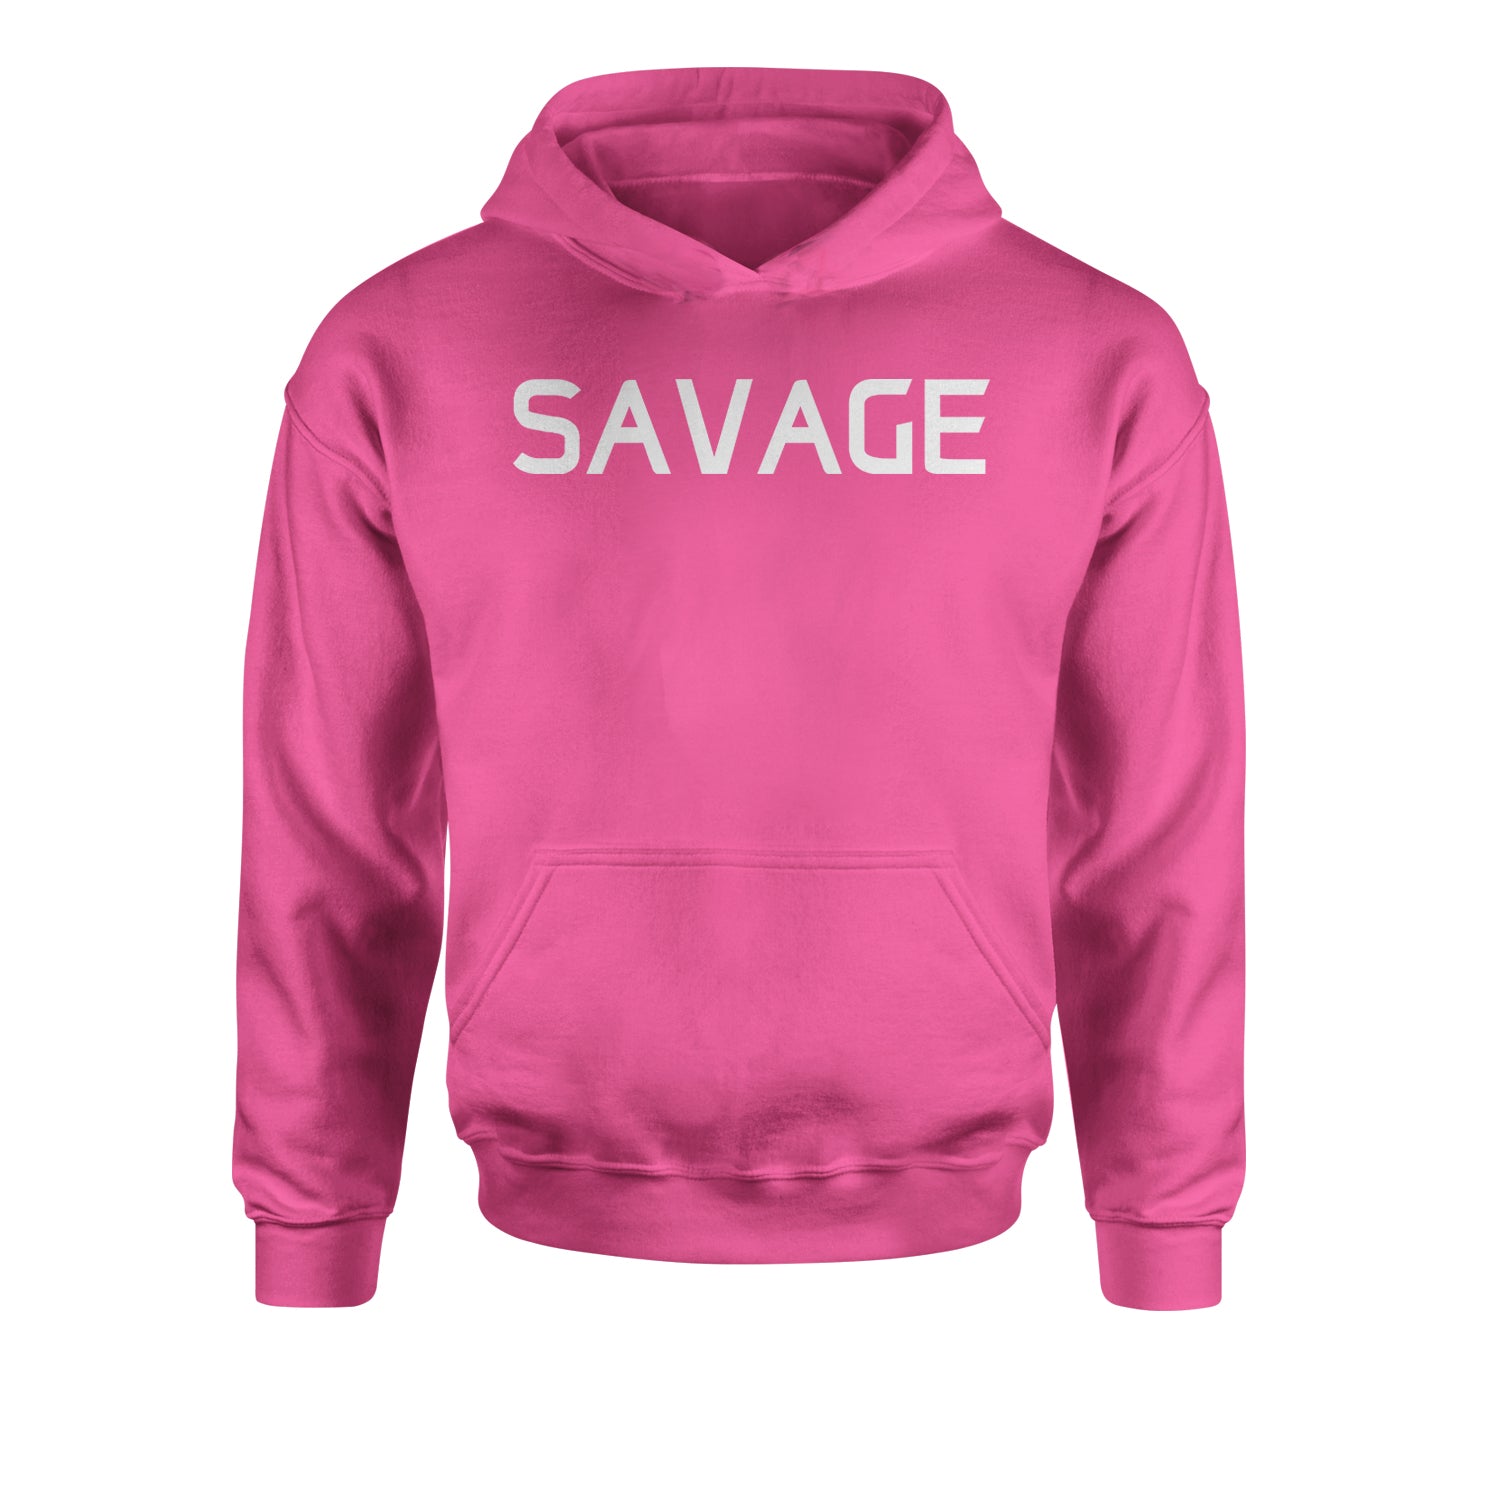 Savage Youth-Sized Hoodie #expressiontees by Expression Tees